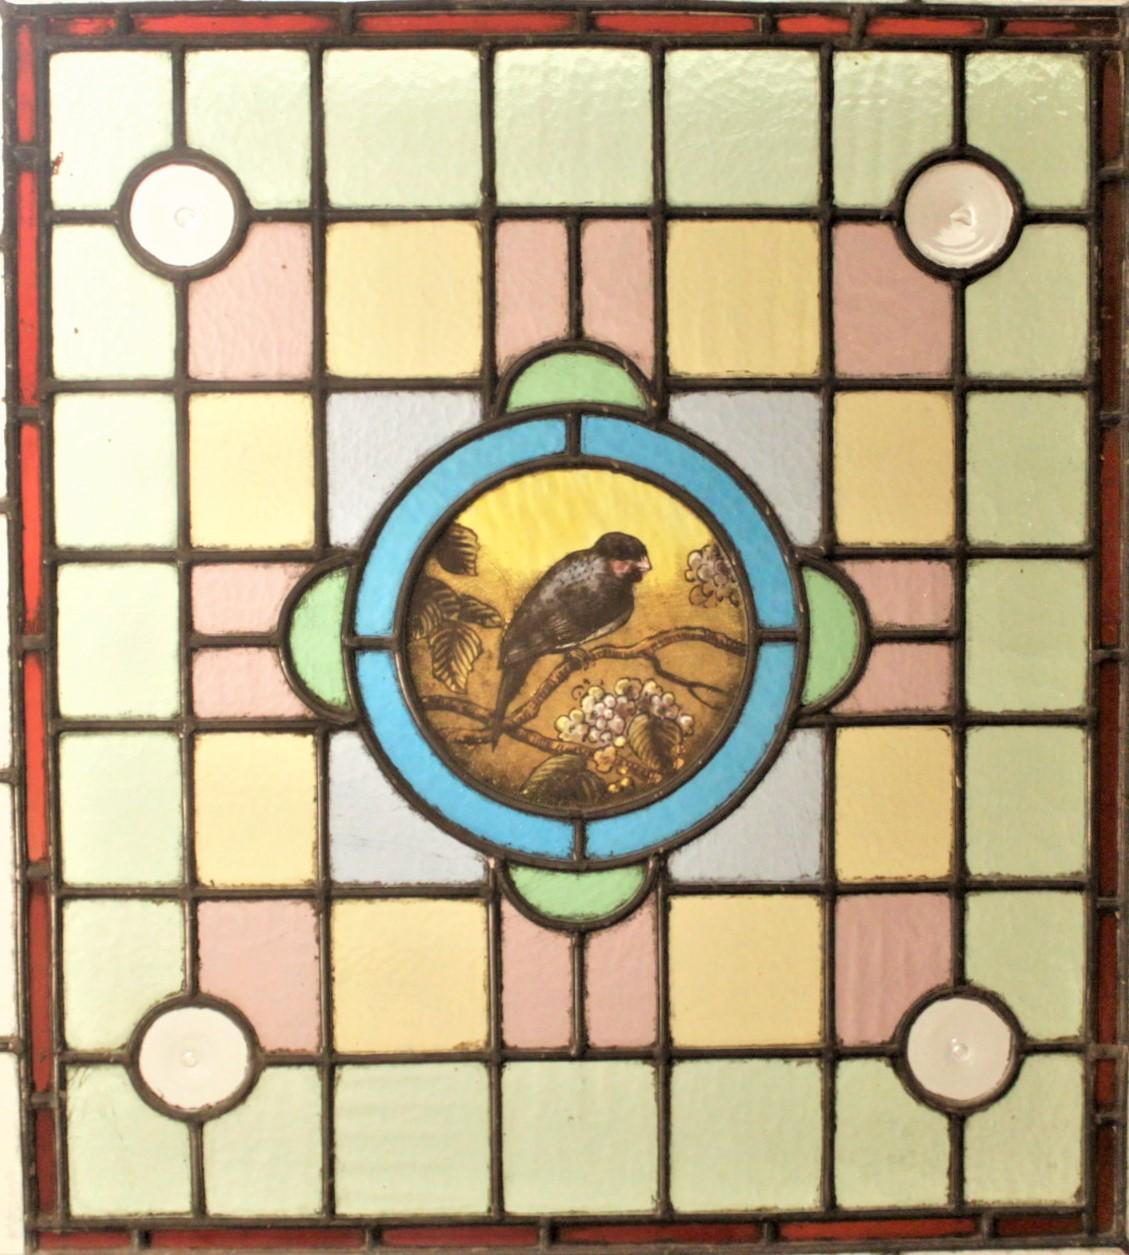 This very elaborate antique stained glass window was likely made in the United States in circa 1880 in the period Victorian style. This stained glass panel features a hand-painted bird in the central circular medallion. The window is done in muted